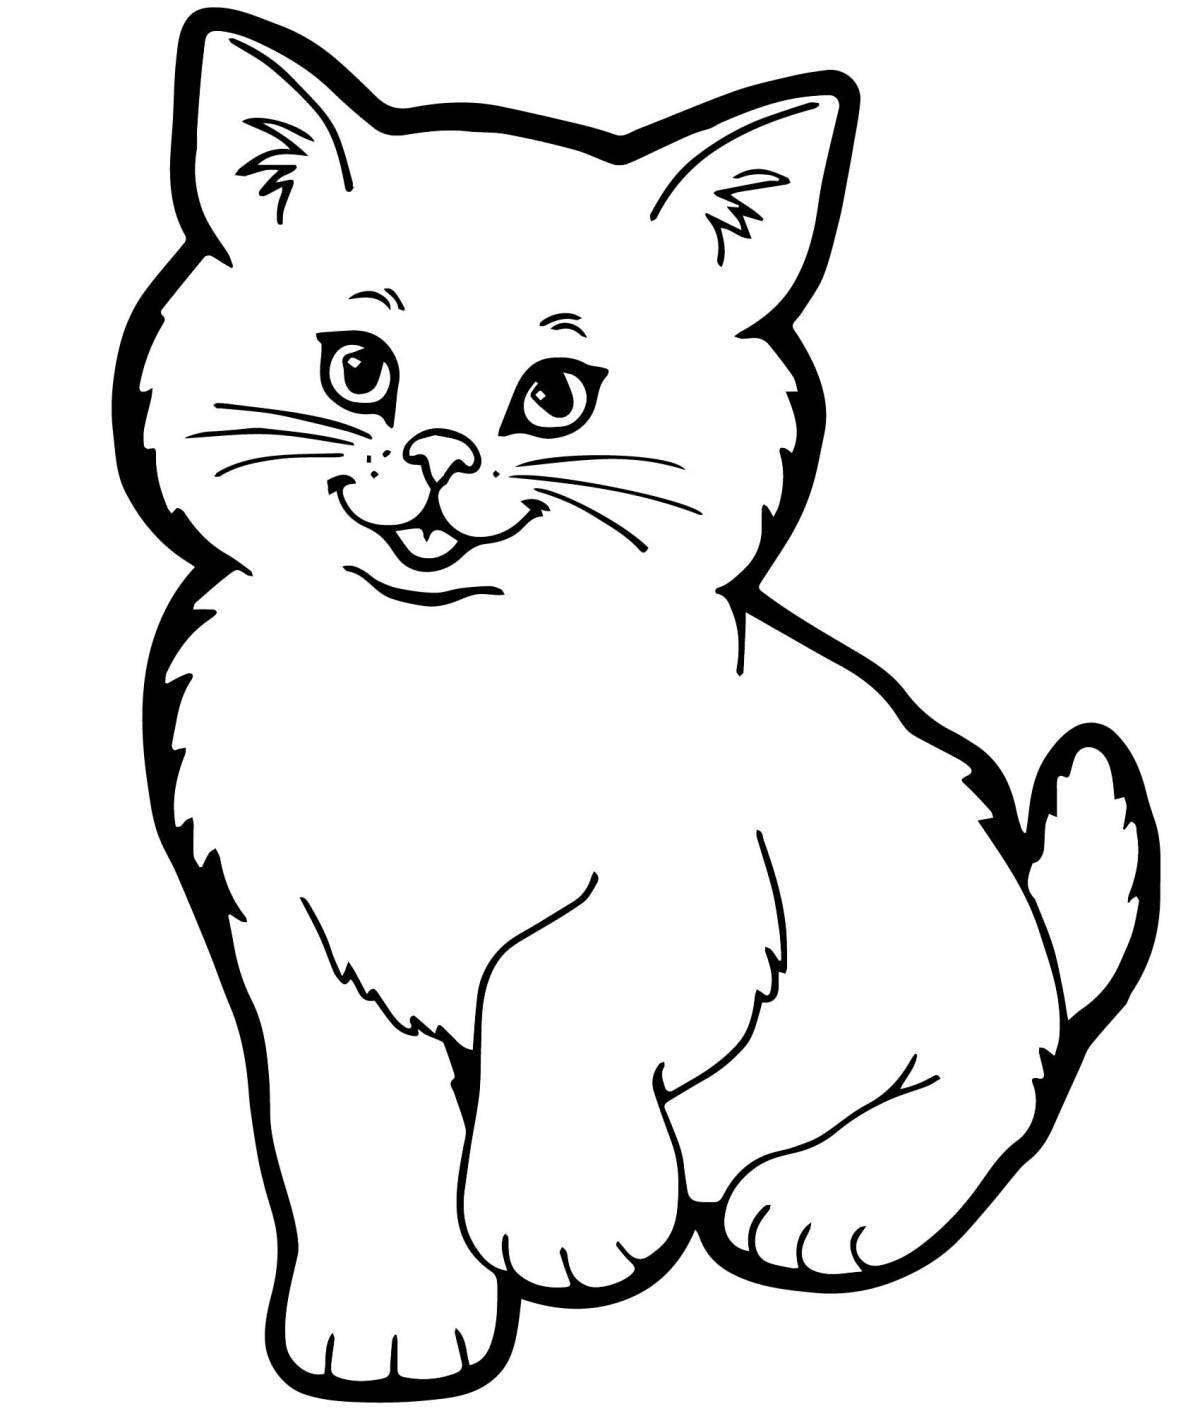 Coloring page cheeky black cat